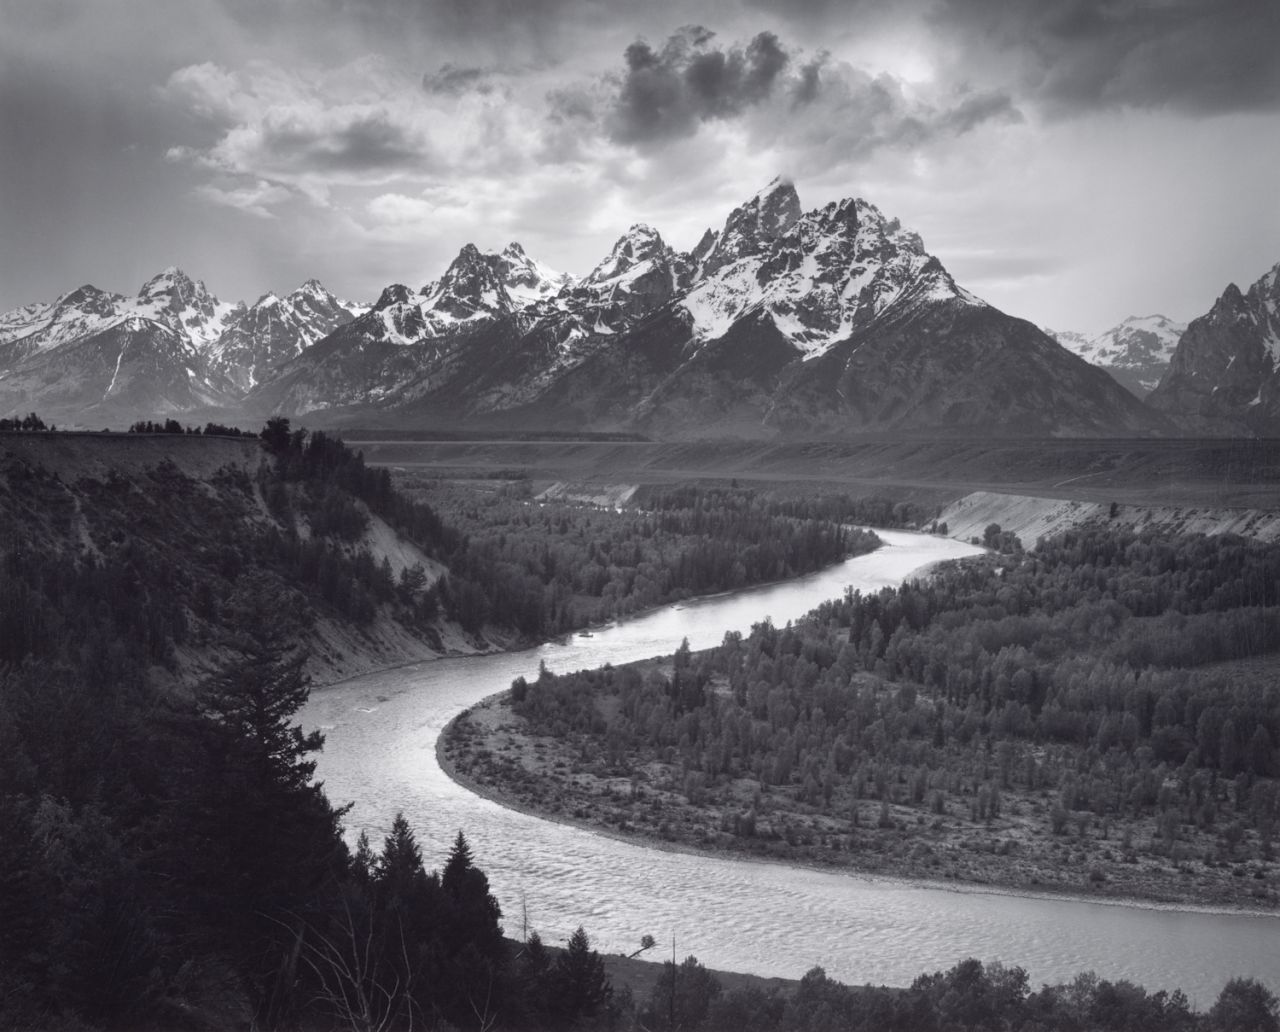 The Tetons and the Snake River, Grand Teton National Park, Wyoming, 1942.